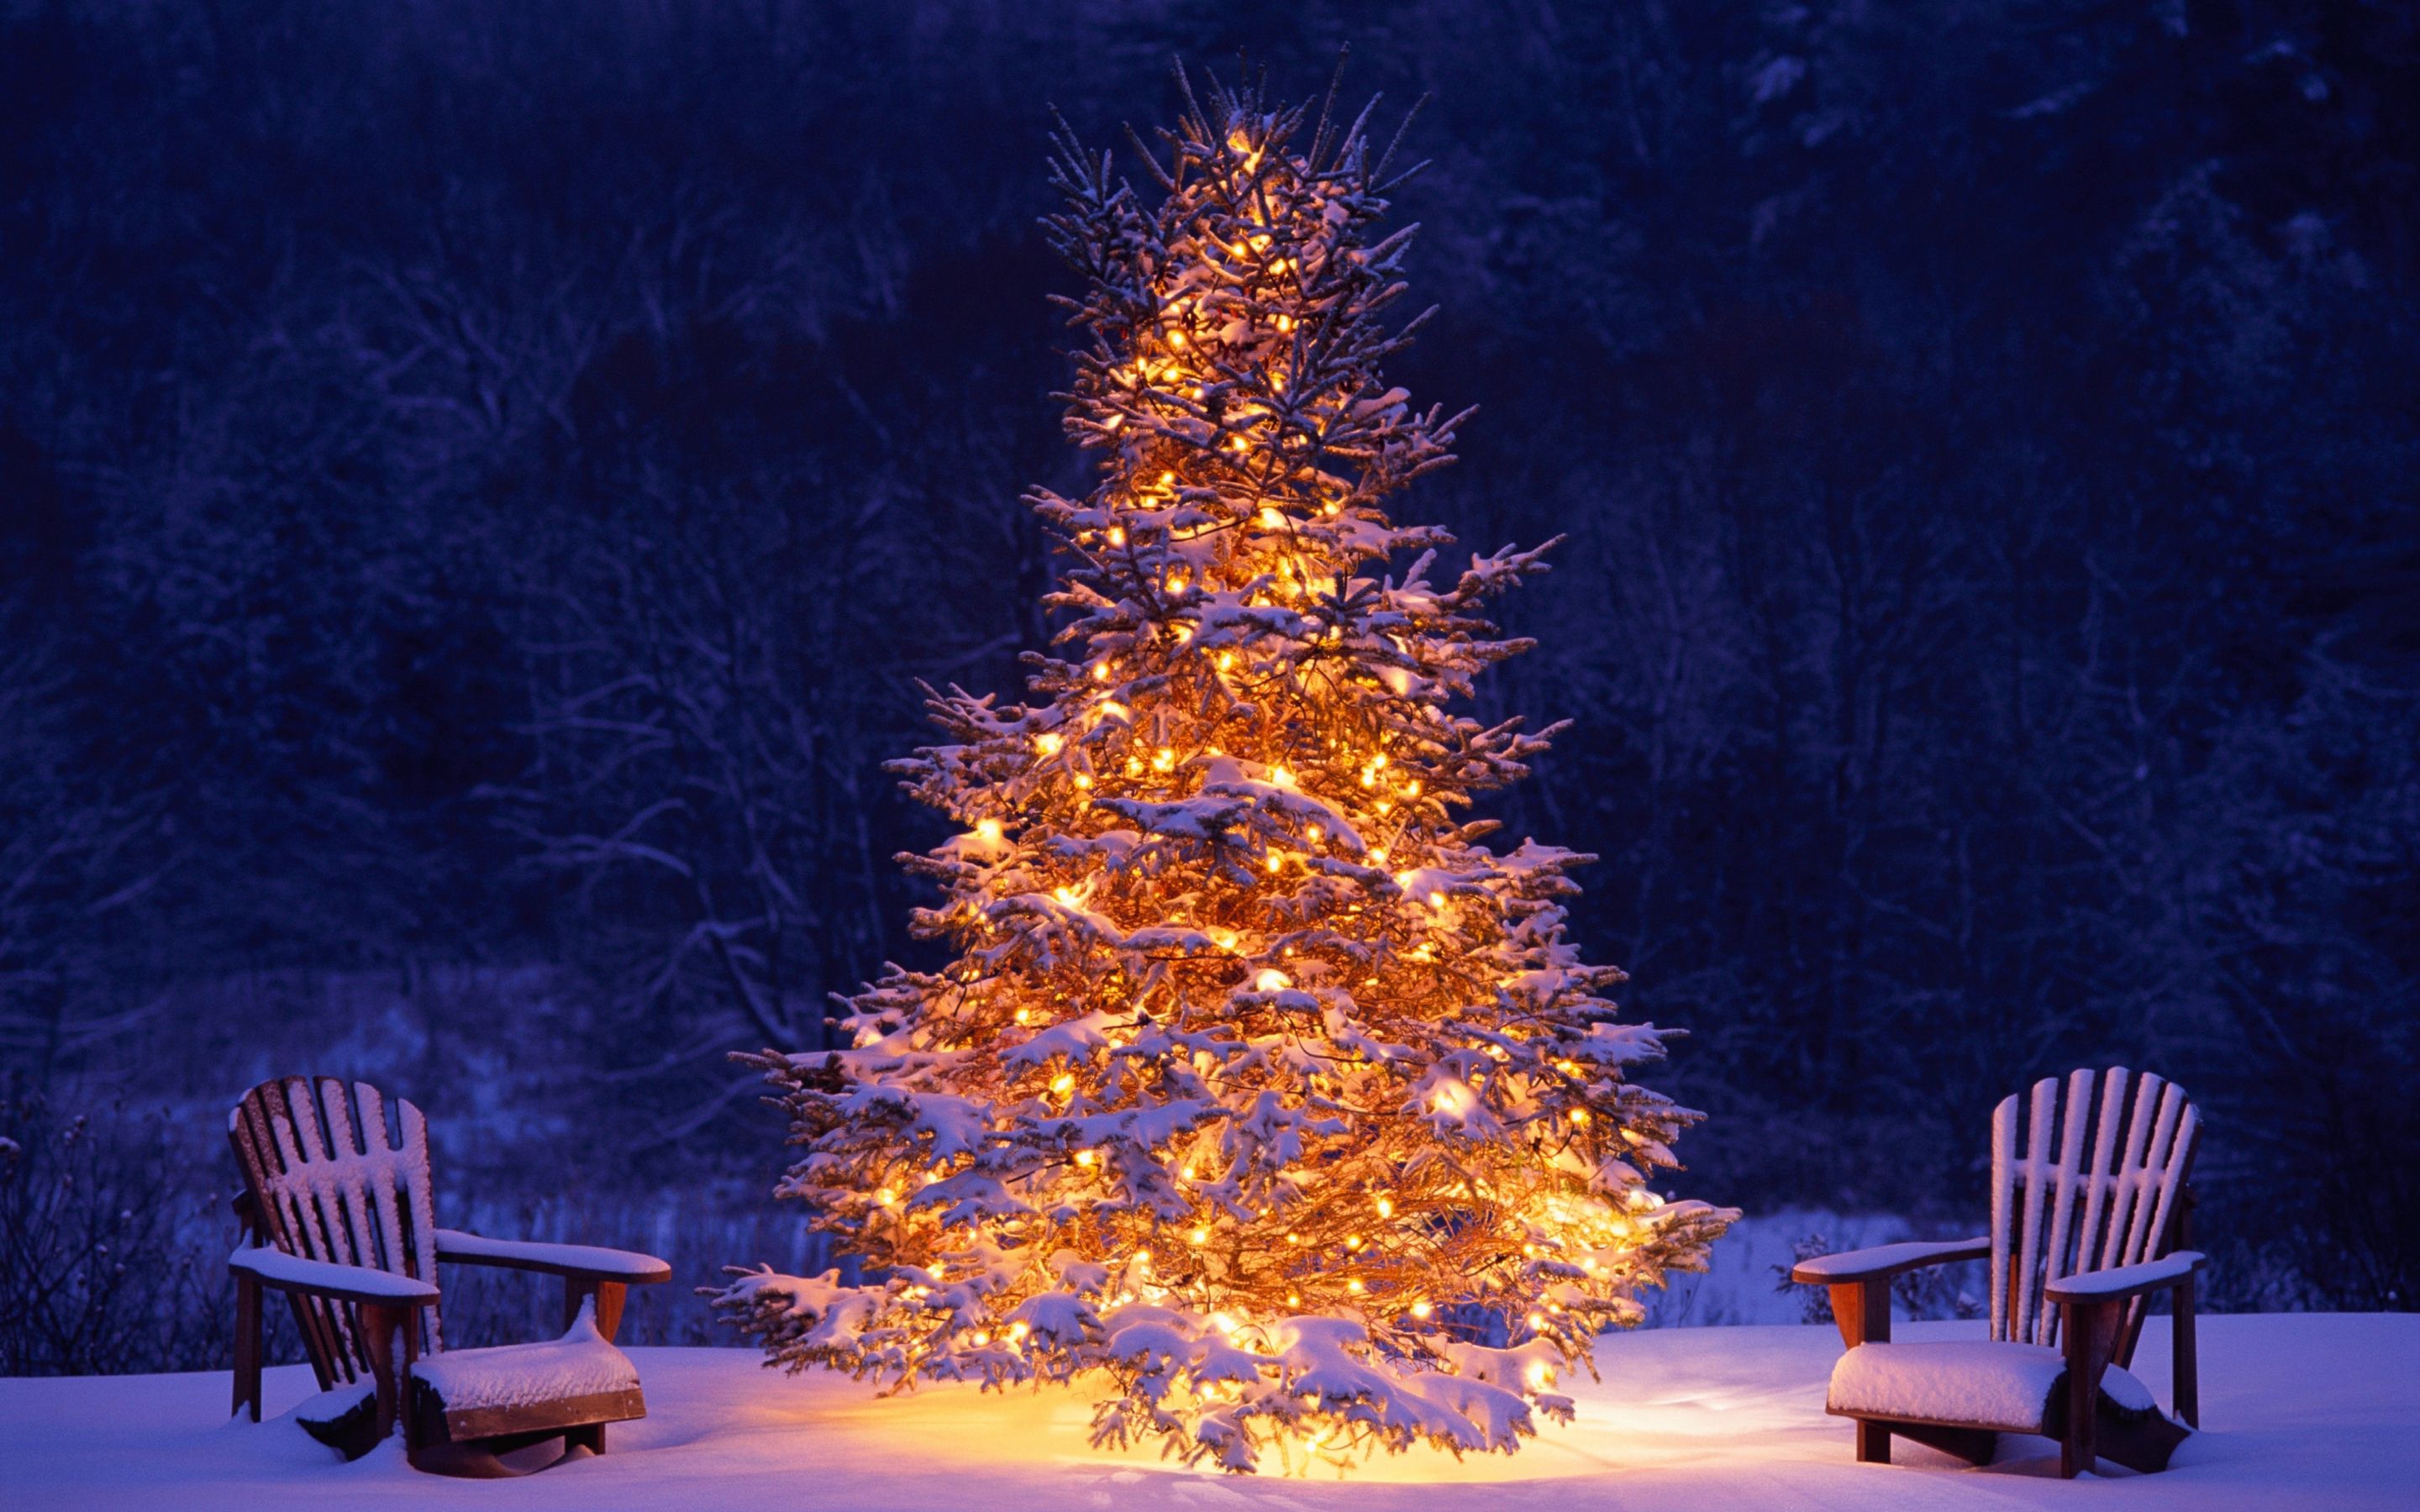 Download 2880x1800 wallpaper christmas tree, chairs, winter, christmas, holiday, mac pro retaia image, background, 1460